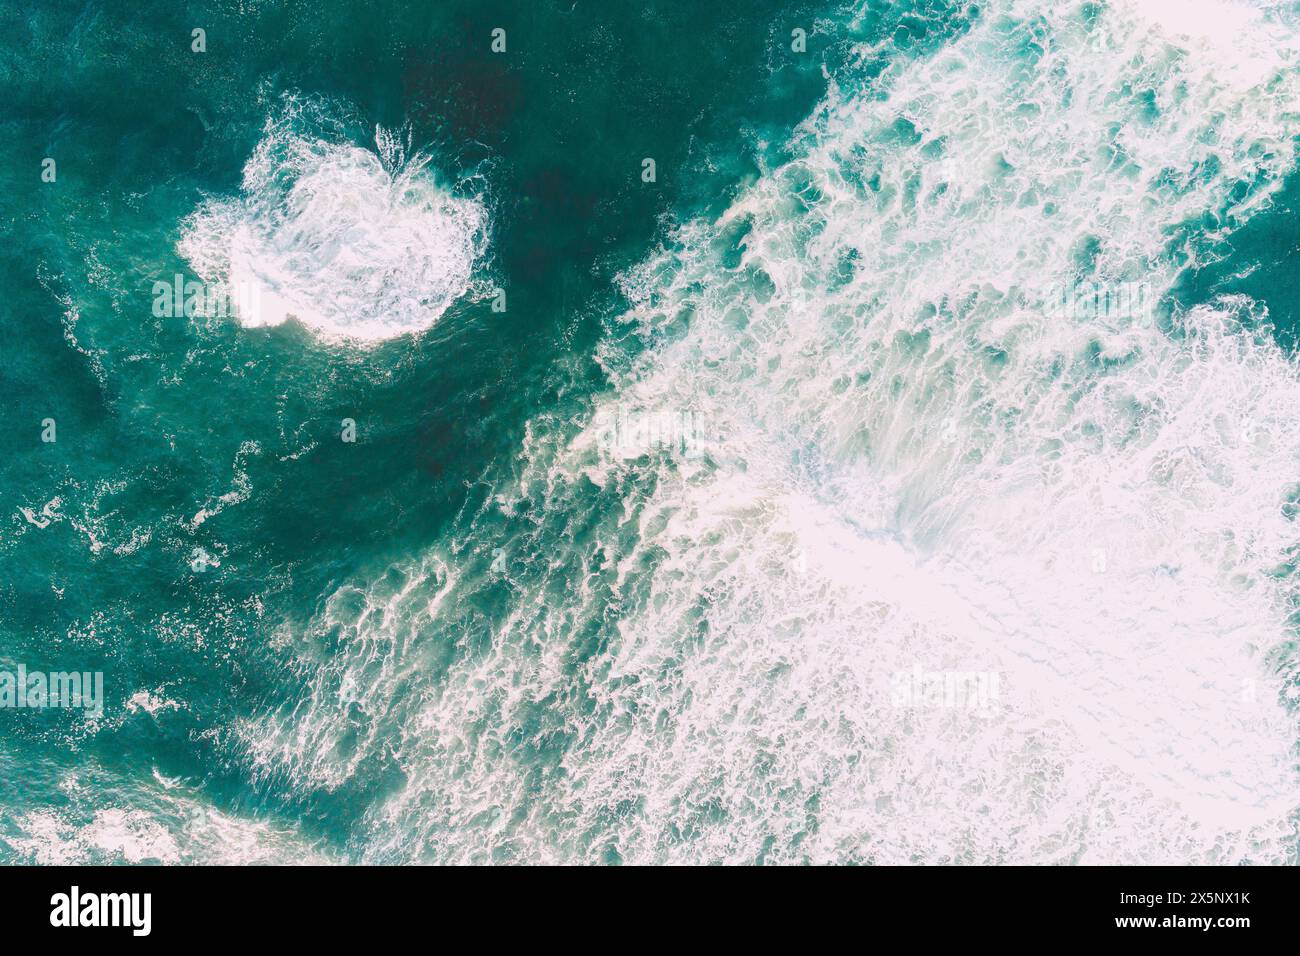 foam from waves on the shore of a beach without people, overhead view with drone Stock Photo